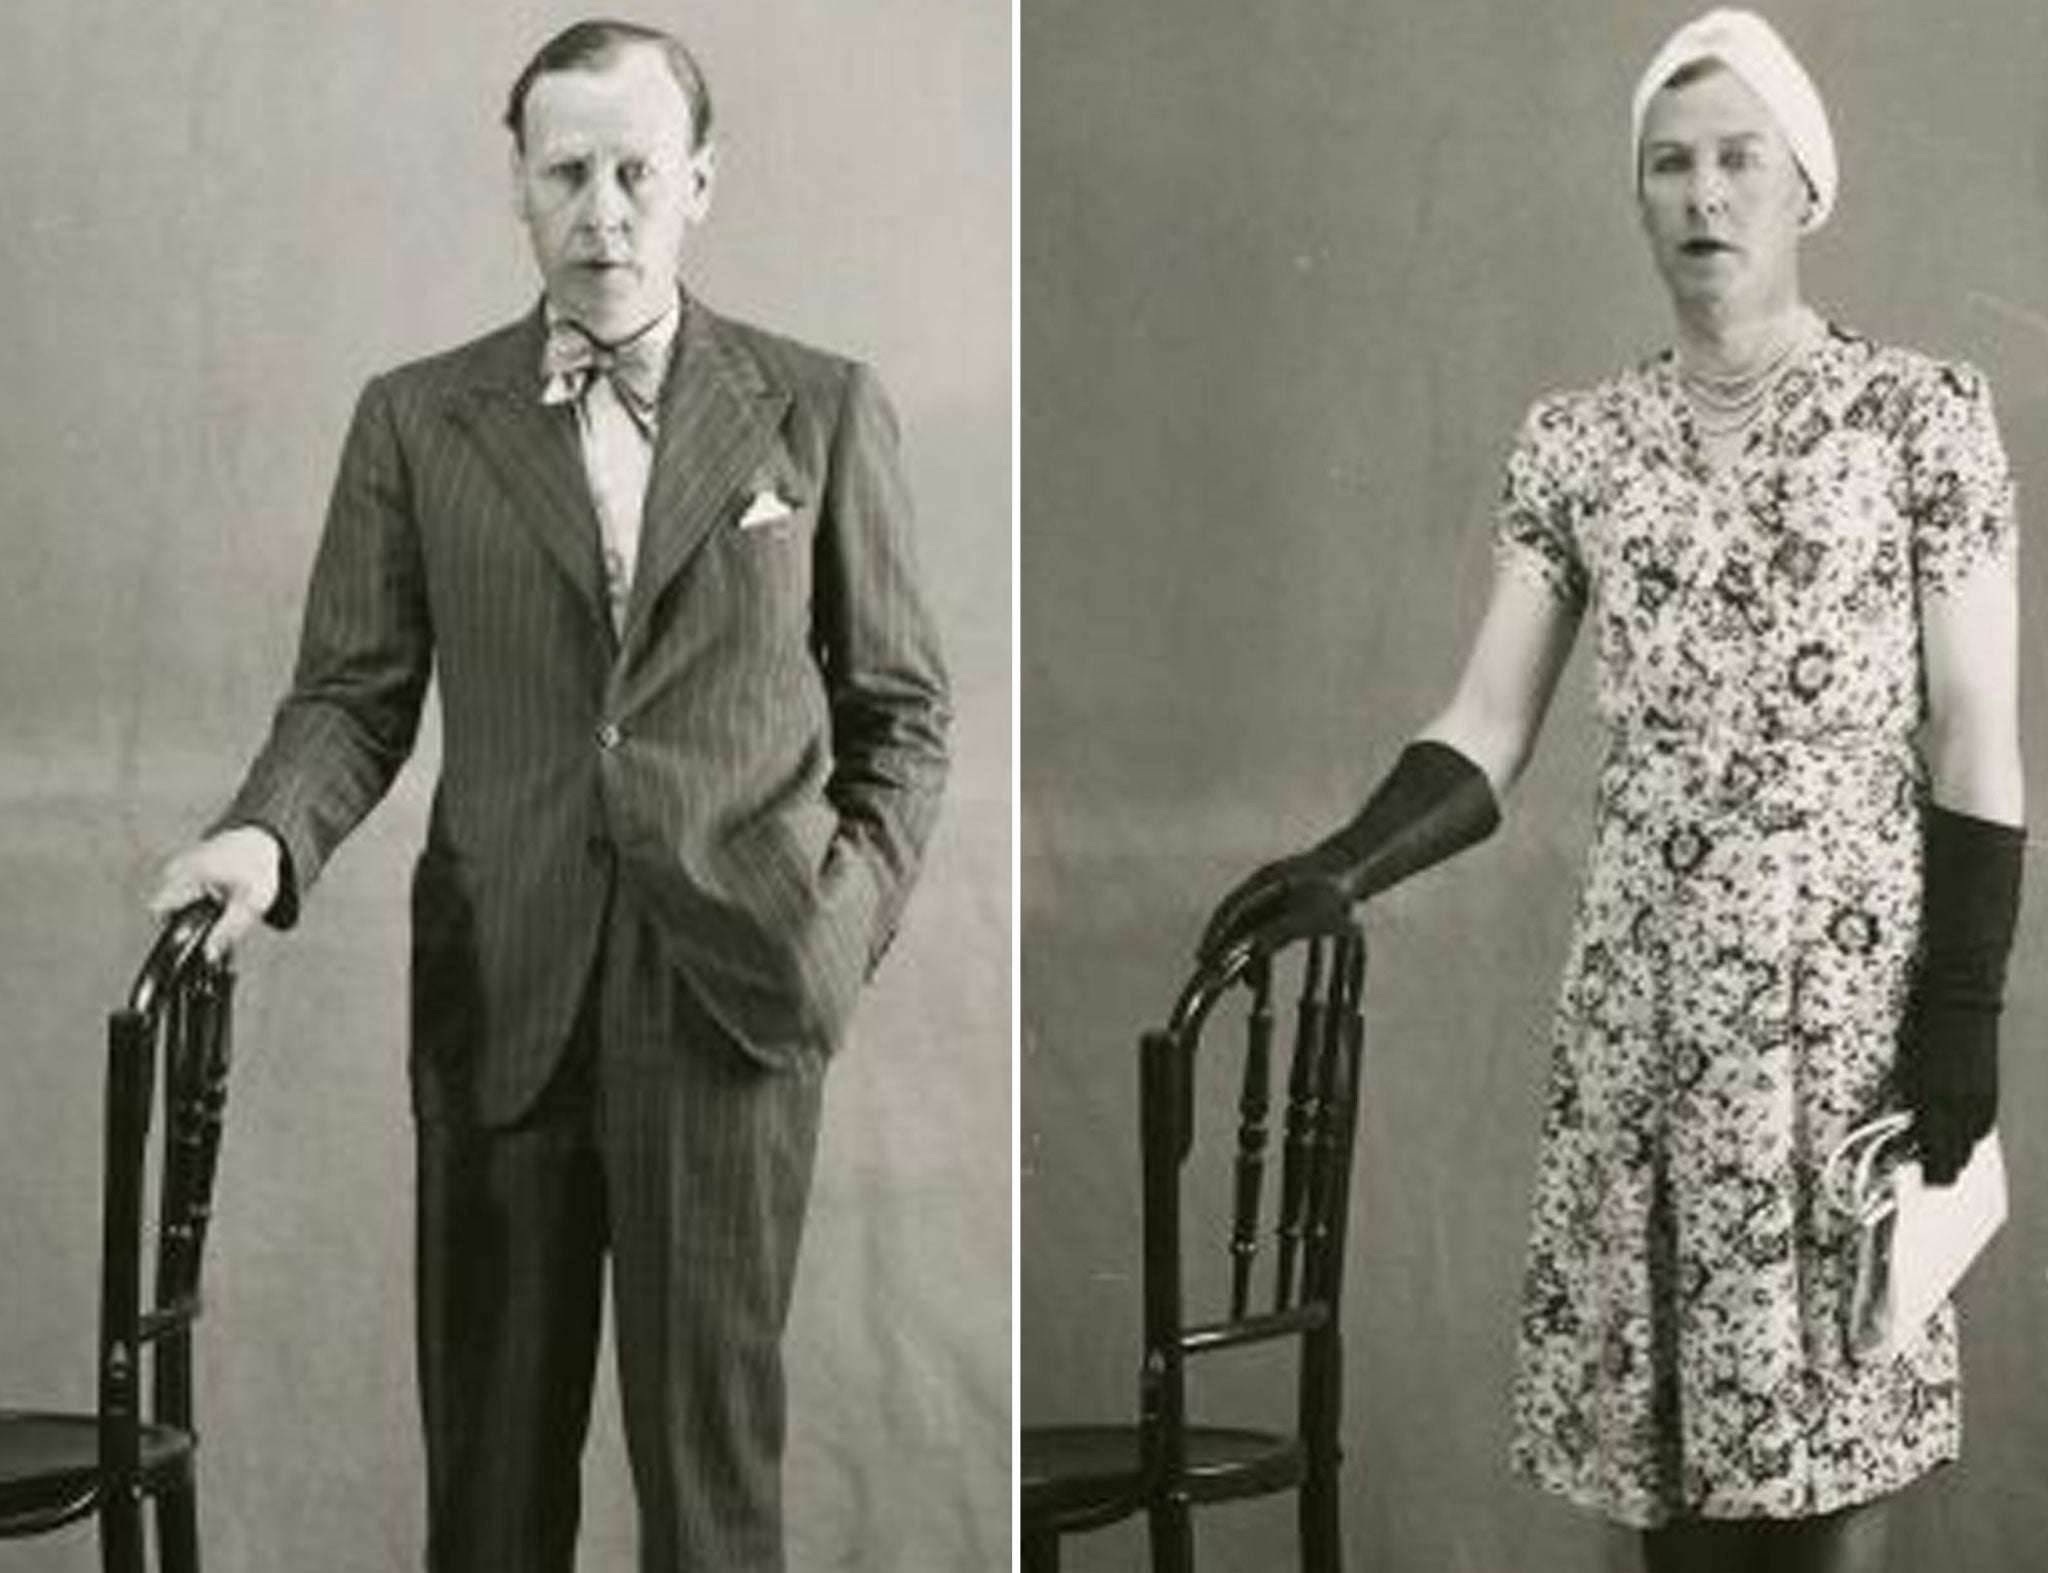 Lieutenant Colonel Dudley Clarke set alarm bells ringing in Whitehall in 1941 when he was arrested in Madrid dressed as a woman